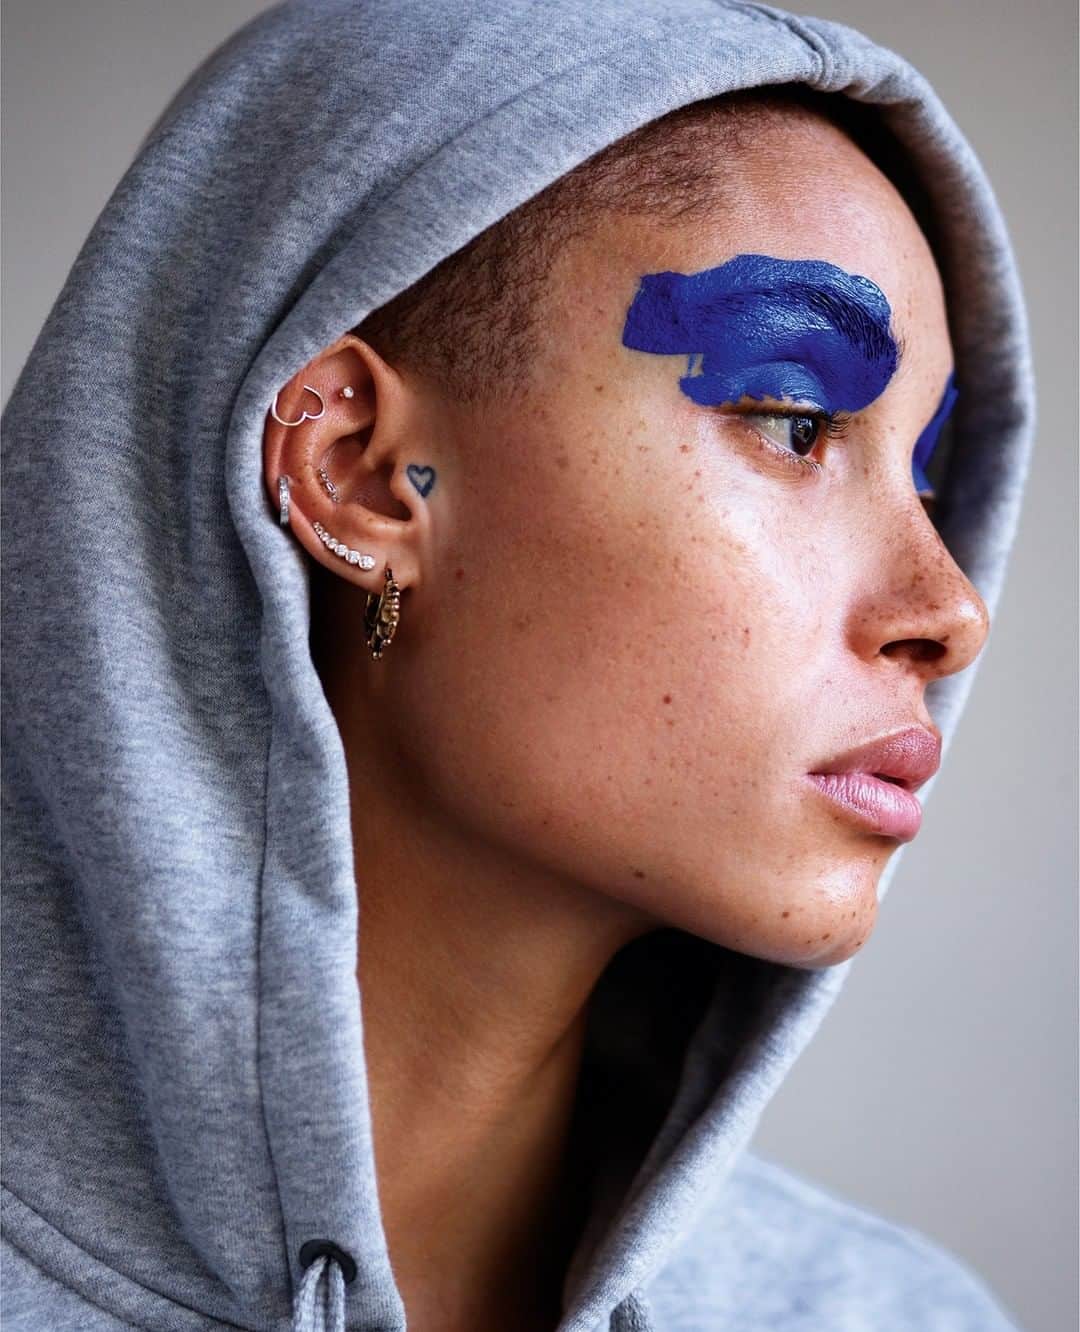 i-Dさんのインスタグラム写真 - (i-DInstagram)「@adwoaaboah: "Just getting through shit. That’s success in itself.⁣⁠ ⁣⁠ The model and Gurls Talk founder extols to @badgalriri the values of self-love and self-care.⁣⁠ ⁣⁠ Read the interview taken from #Rihannazine at the link in our bio. 🔗⁣⁠⁣⁣⁠⁣⁠ ⁣⁣⁣⁠⁣⁣⁠⁣⁠ [i-D SPECIAL EDITION 01 2020]⁣⁣⁣ ⁣⁣⁣⁣⁣⁣⁣⁠⁣⁣⁣⁣⁣⁣⁠⁣⁣⁣⁣⁠⁣⁣⁠⁣⁠ .⁣⁣⁣⁠⁣⁣⁠⁣⁠ .⁣⁣⁣⁠⁣⁣⁠⁣⁠ .⁣⁣⁣⁠⁣⁣⁠⁣⁠ Photography @mario_sorrenti⁣⁣⁣⁣⁣⁣⁣⁣⁣⁣⁣⁠⁣⁣⁣⁣⁣⁣⁠⁣⁠⁣⁣⁣⁠⁣⁠ Editor-In-Chief & styling @alastairmckimm⁣⁣⁣⁠⁣⁠ Hair @duffy_duffy at @streetersagency⁣⁠⁣⁣⁣⁣⁣⁠⁣⁠⁣⁣⁣⁠⁣⁠ Make-up Kanako Takase at @streetersagency⁣⁠ Adwoa wears Hoodie @Gap⁣⁠」1月30日 22時15分 - i_d